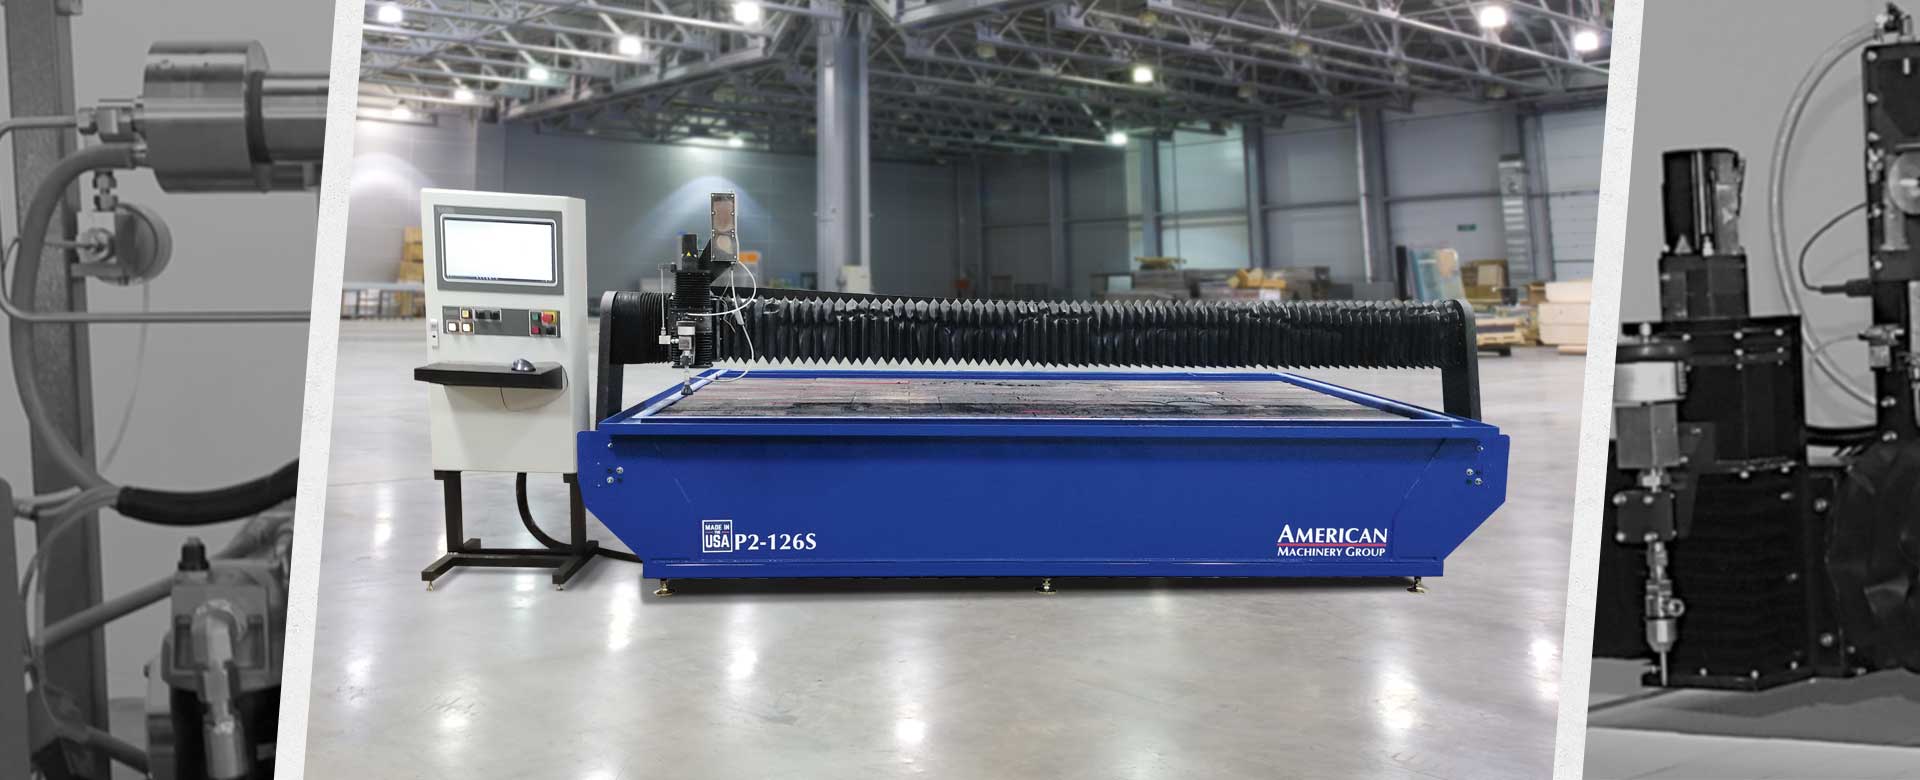 GSS Machinery offers waterjet cutting systems from American Machinery Group in multiple models and configurations.